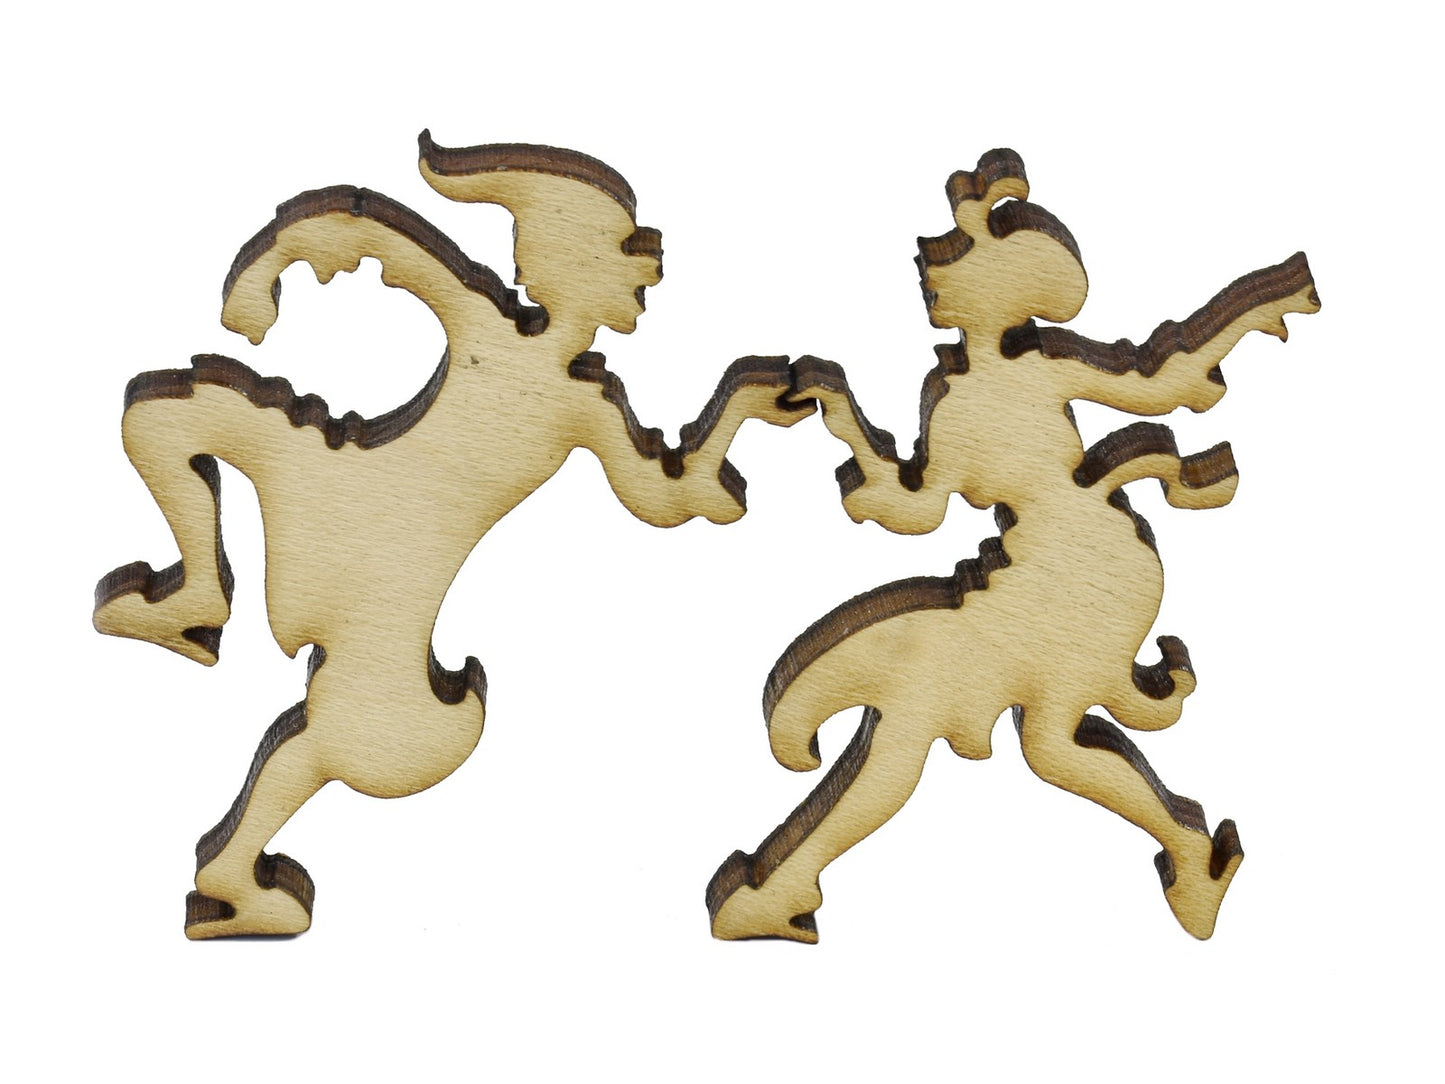 A closeup of pieces in the shape of two people dancing.